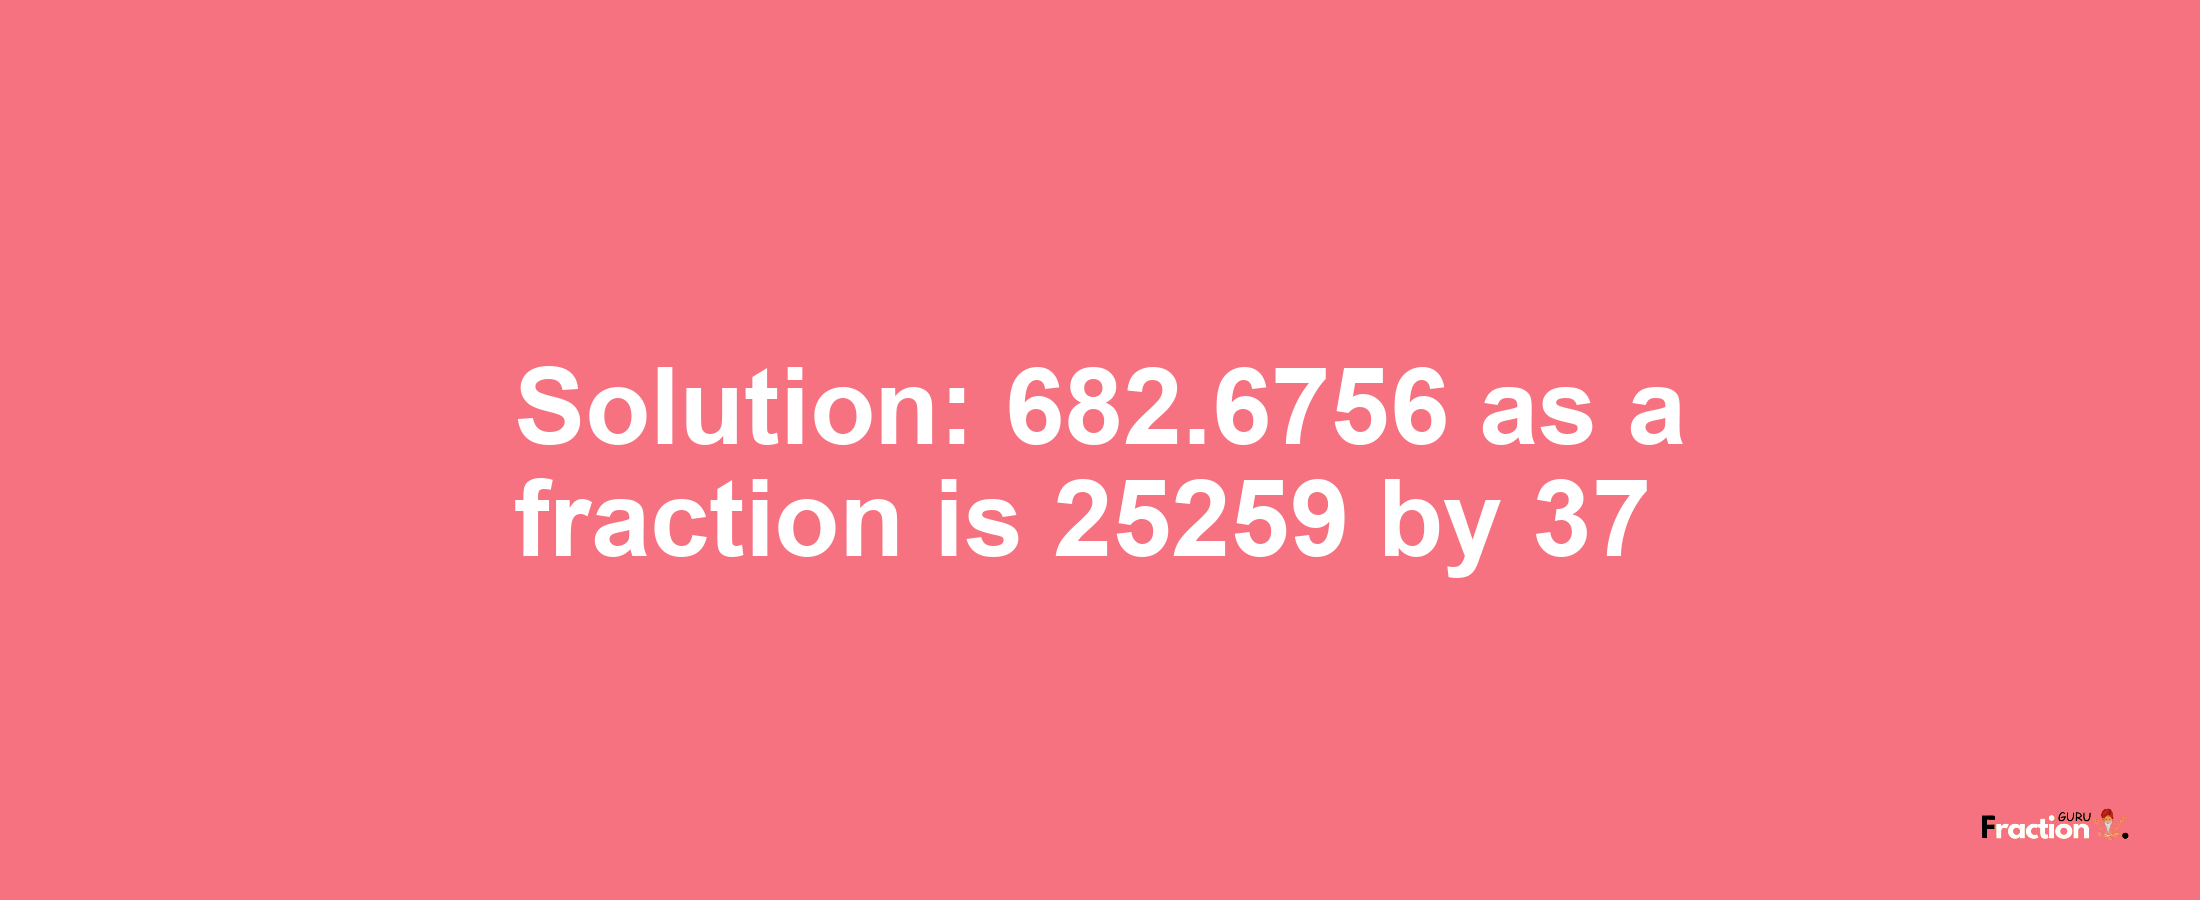 Solution:682.6756 as a fraction is 25259/37